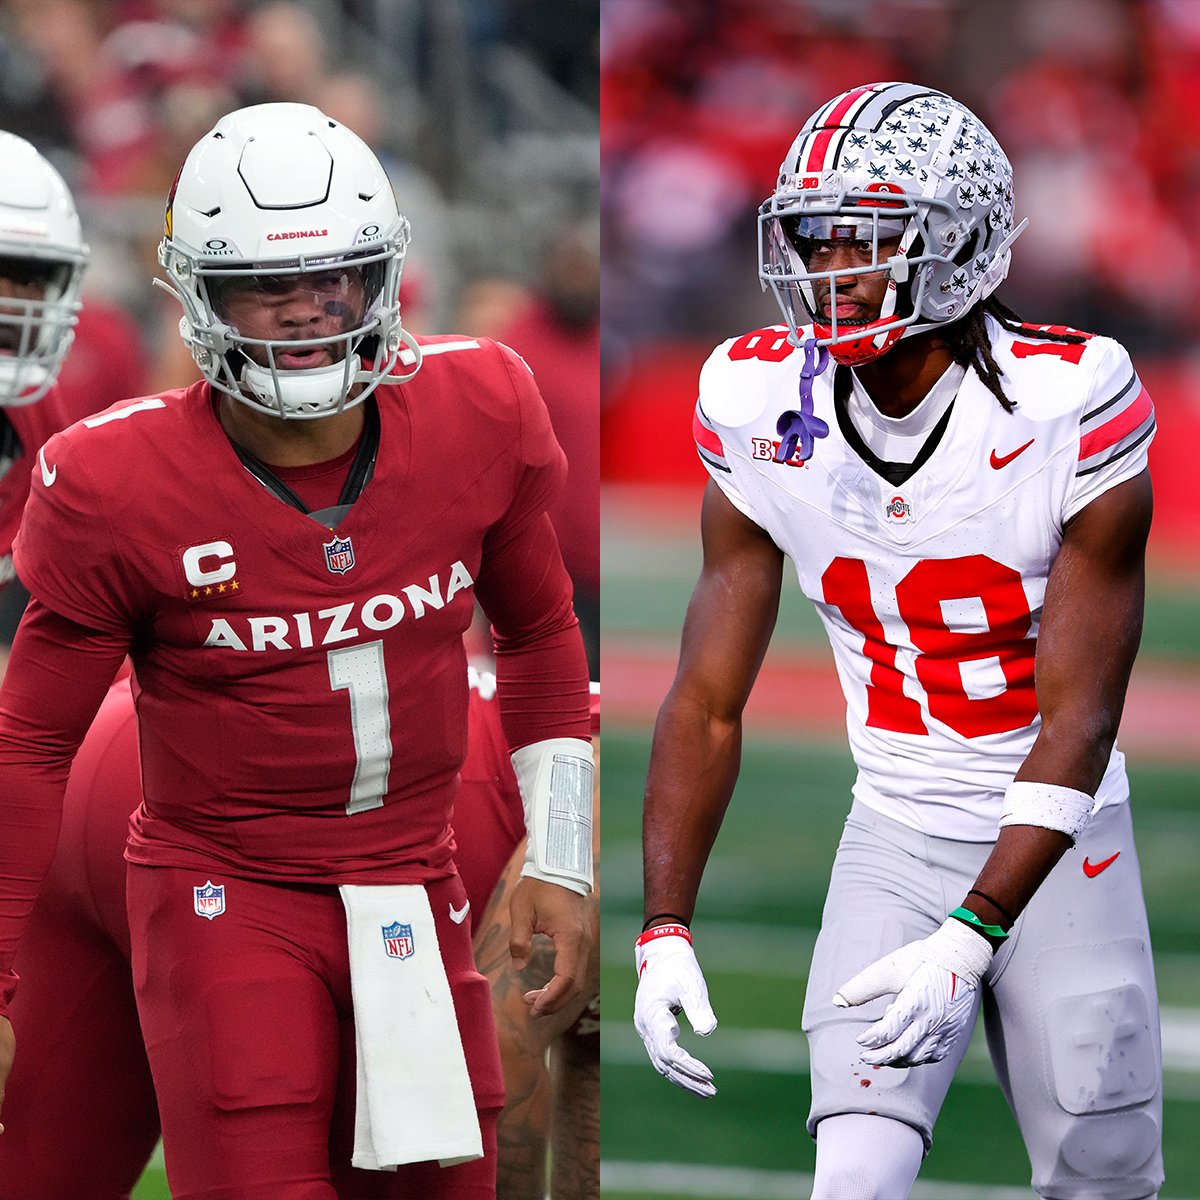 Who is stopping this duo? 😳 #Cardinals | #NFLDraft